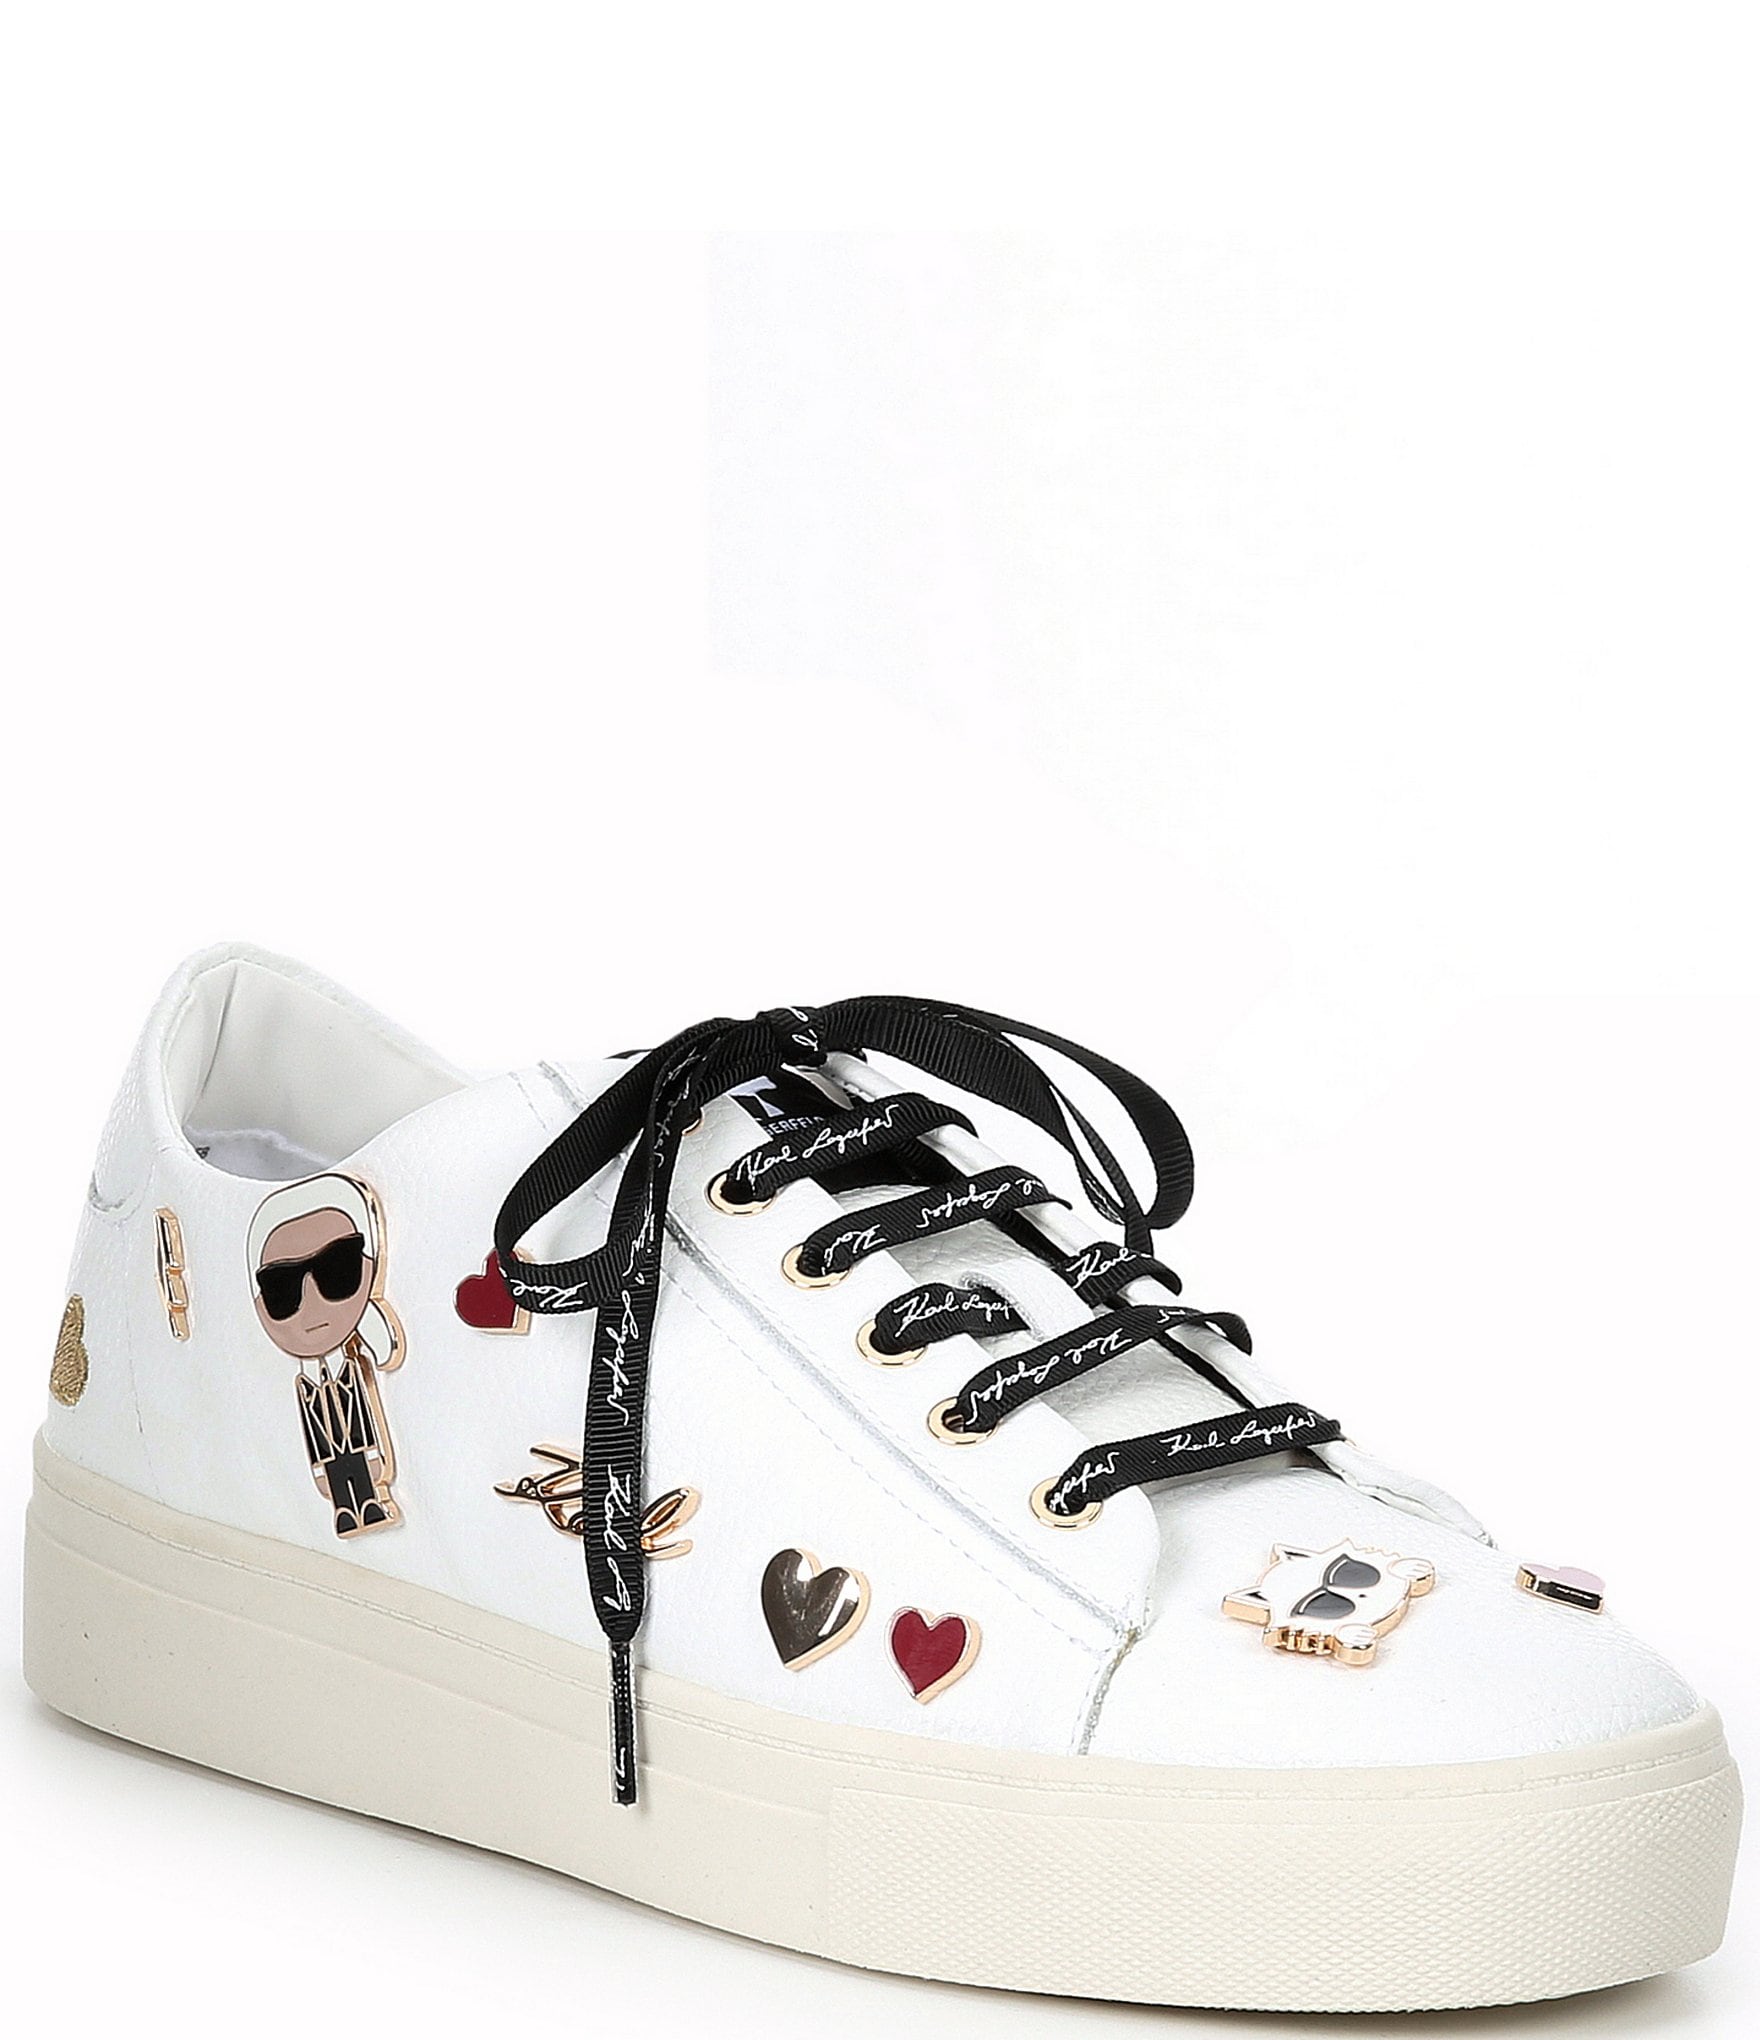 Possession Refreshing pastel KARL LAGERFELD PARIS Cate Charm Detail Lace-Up Leather Platform Sneakers |  Dillard's